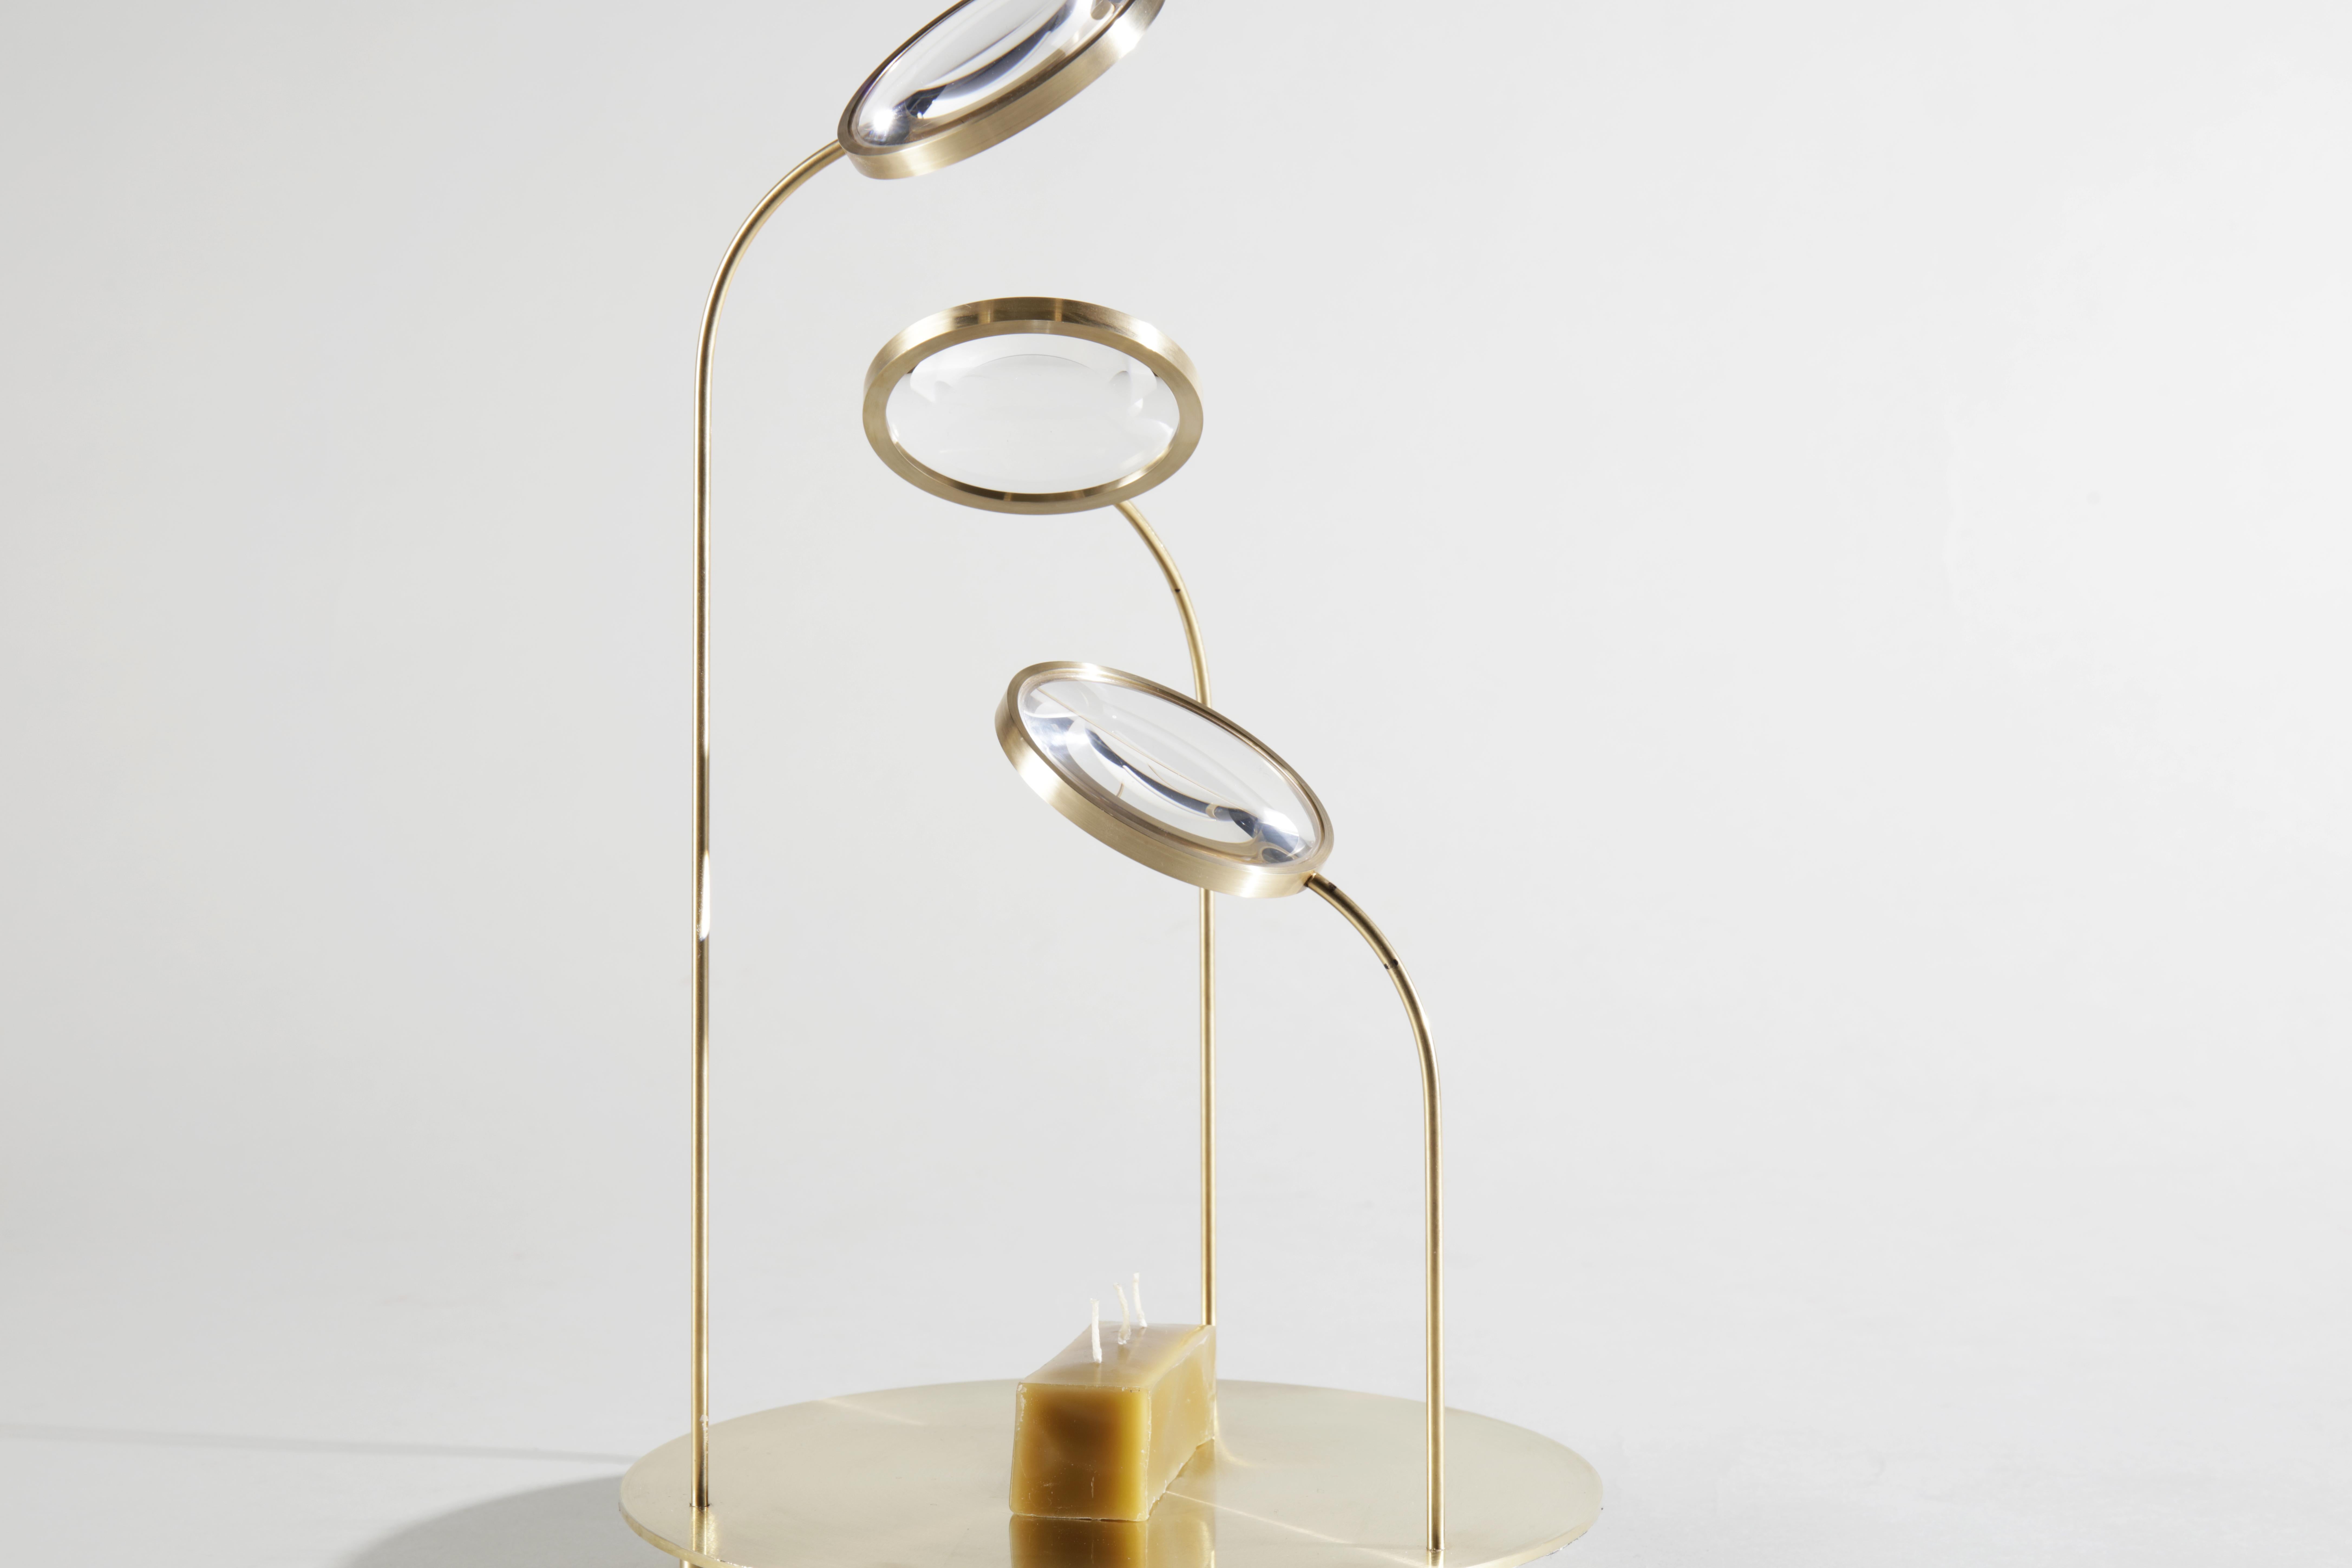 ‘Relativistic Objects’ challenges contemporary behaviours and life habits related to the way we conceive and perceive
the passing of time. These objects speak to anyone interested in redefining the way we approach and experience our
lives, and